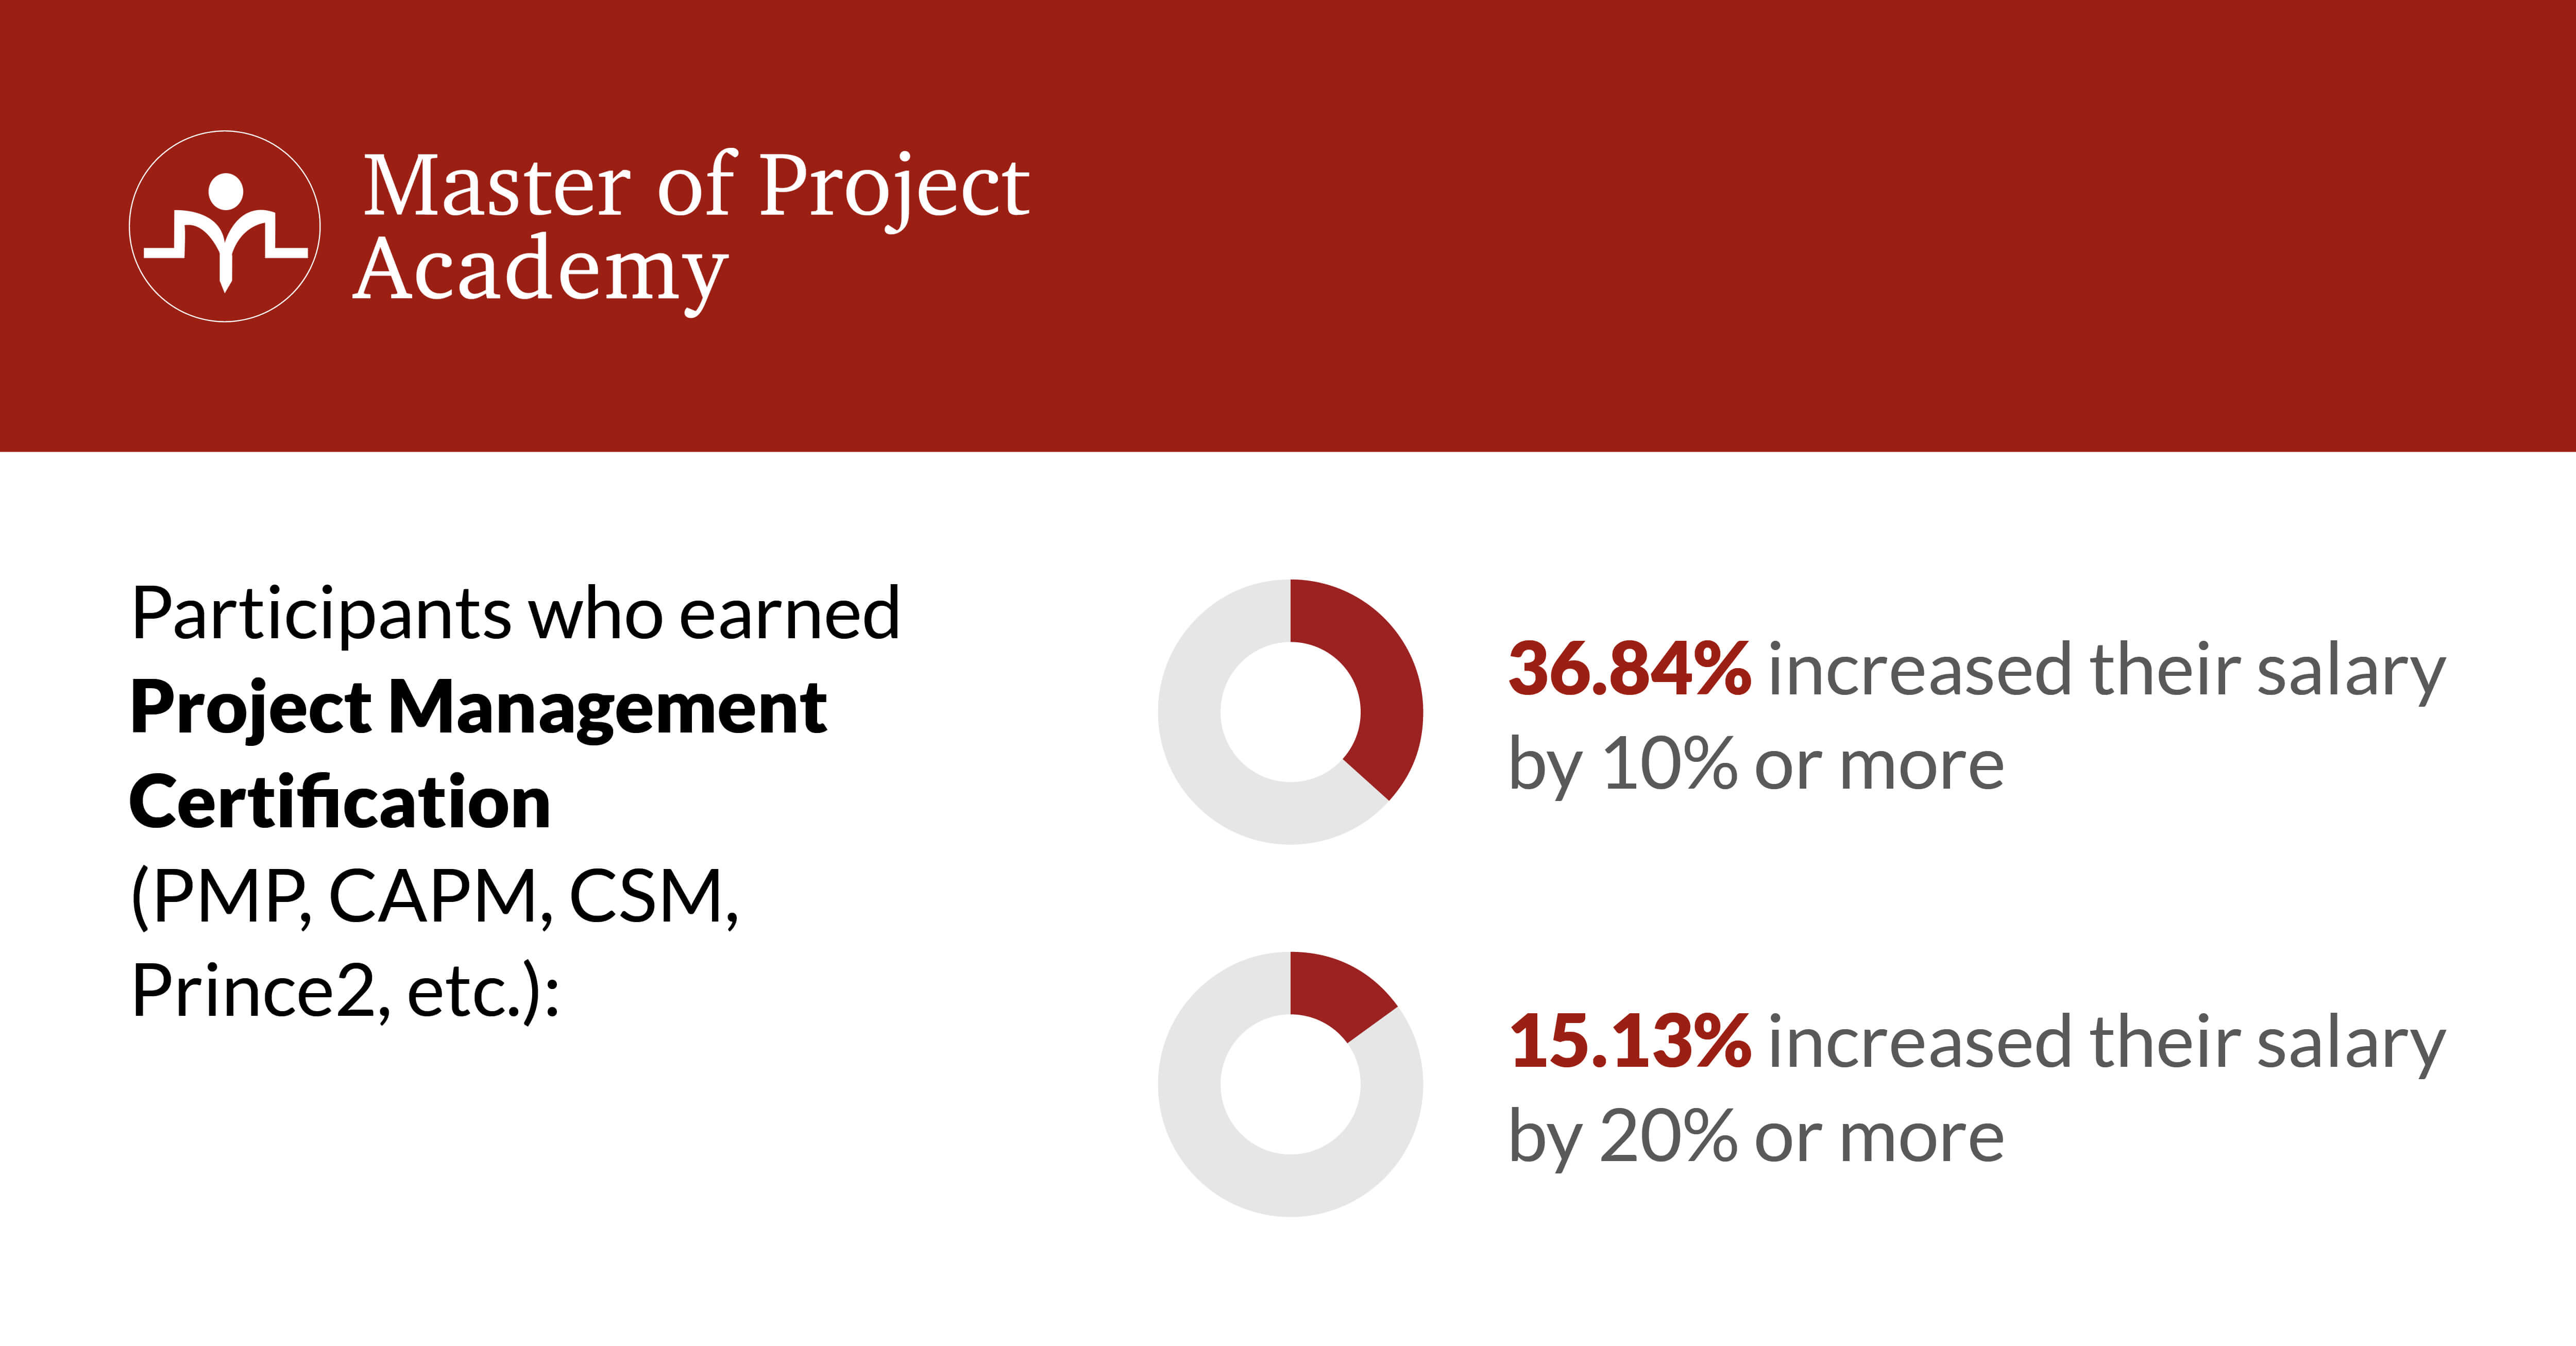 Participants who earned Project Management Certification: 36.84% increased their salary by 10% or more and 15.13% increased their salary by 20% or more.